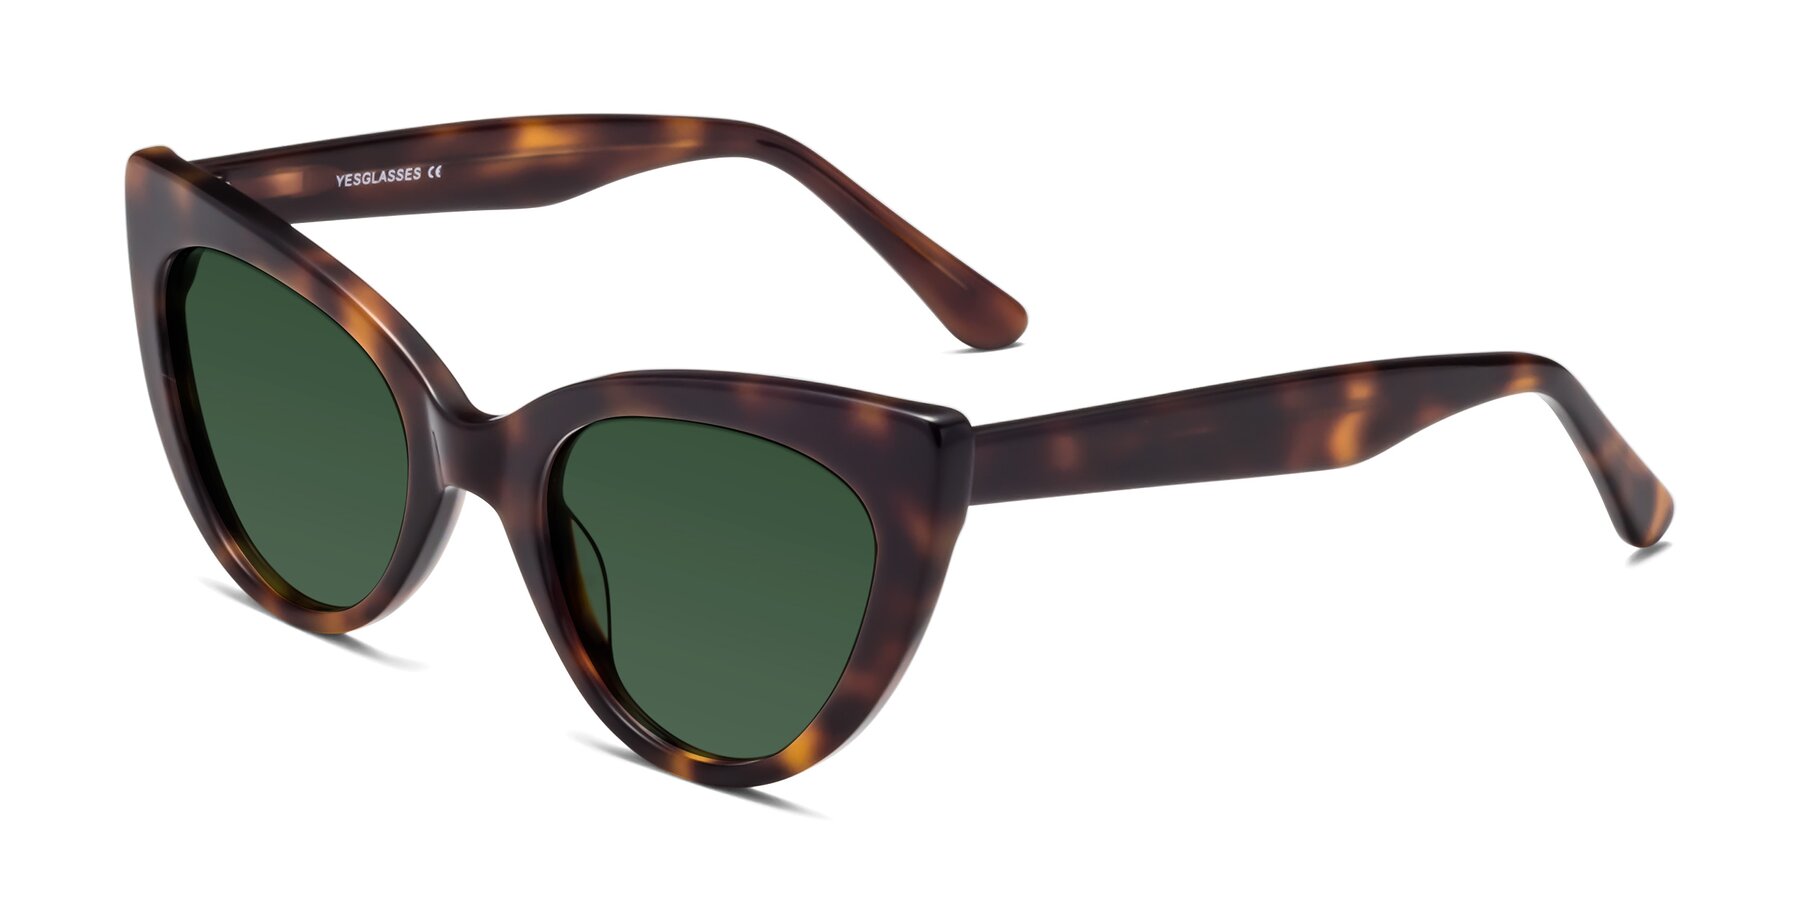 Angle of Tiesi in Tortoise with Green Tinted Lenses